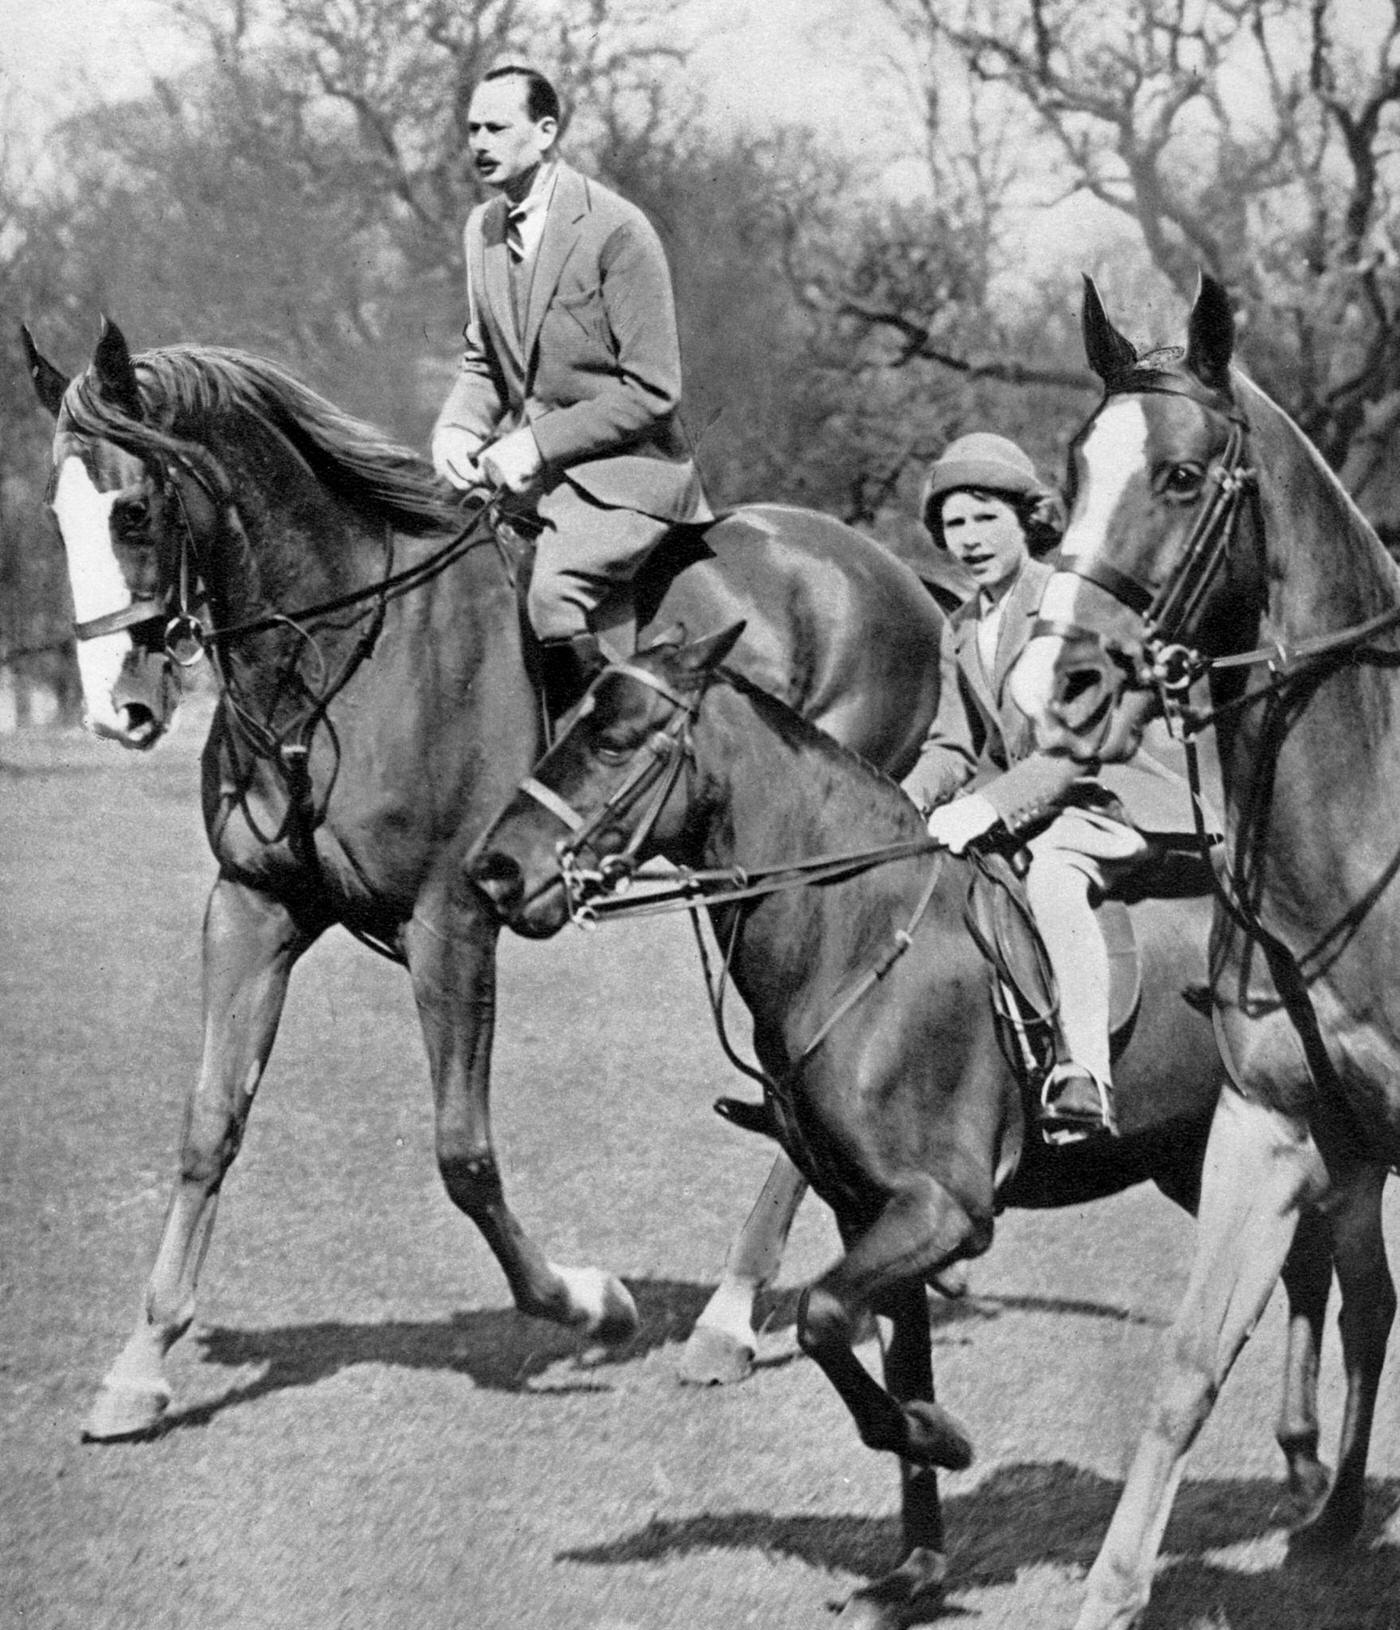 The Duke of Gloucester riding with Princess Elizabeth in Windsor Great Park, 1936.